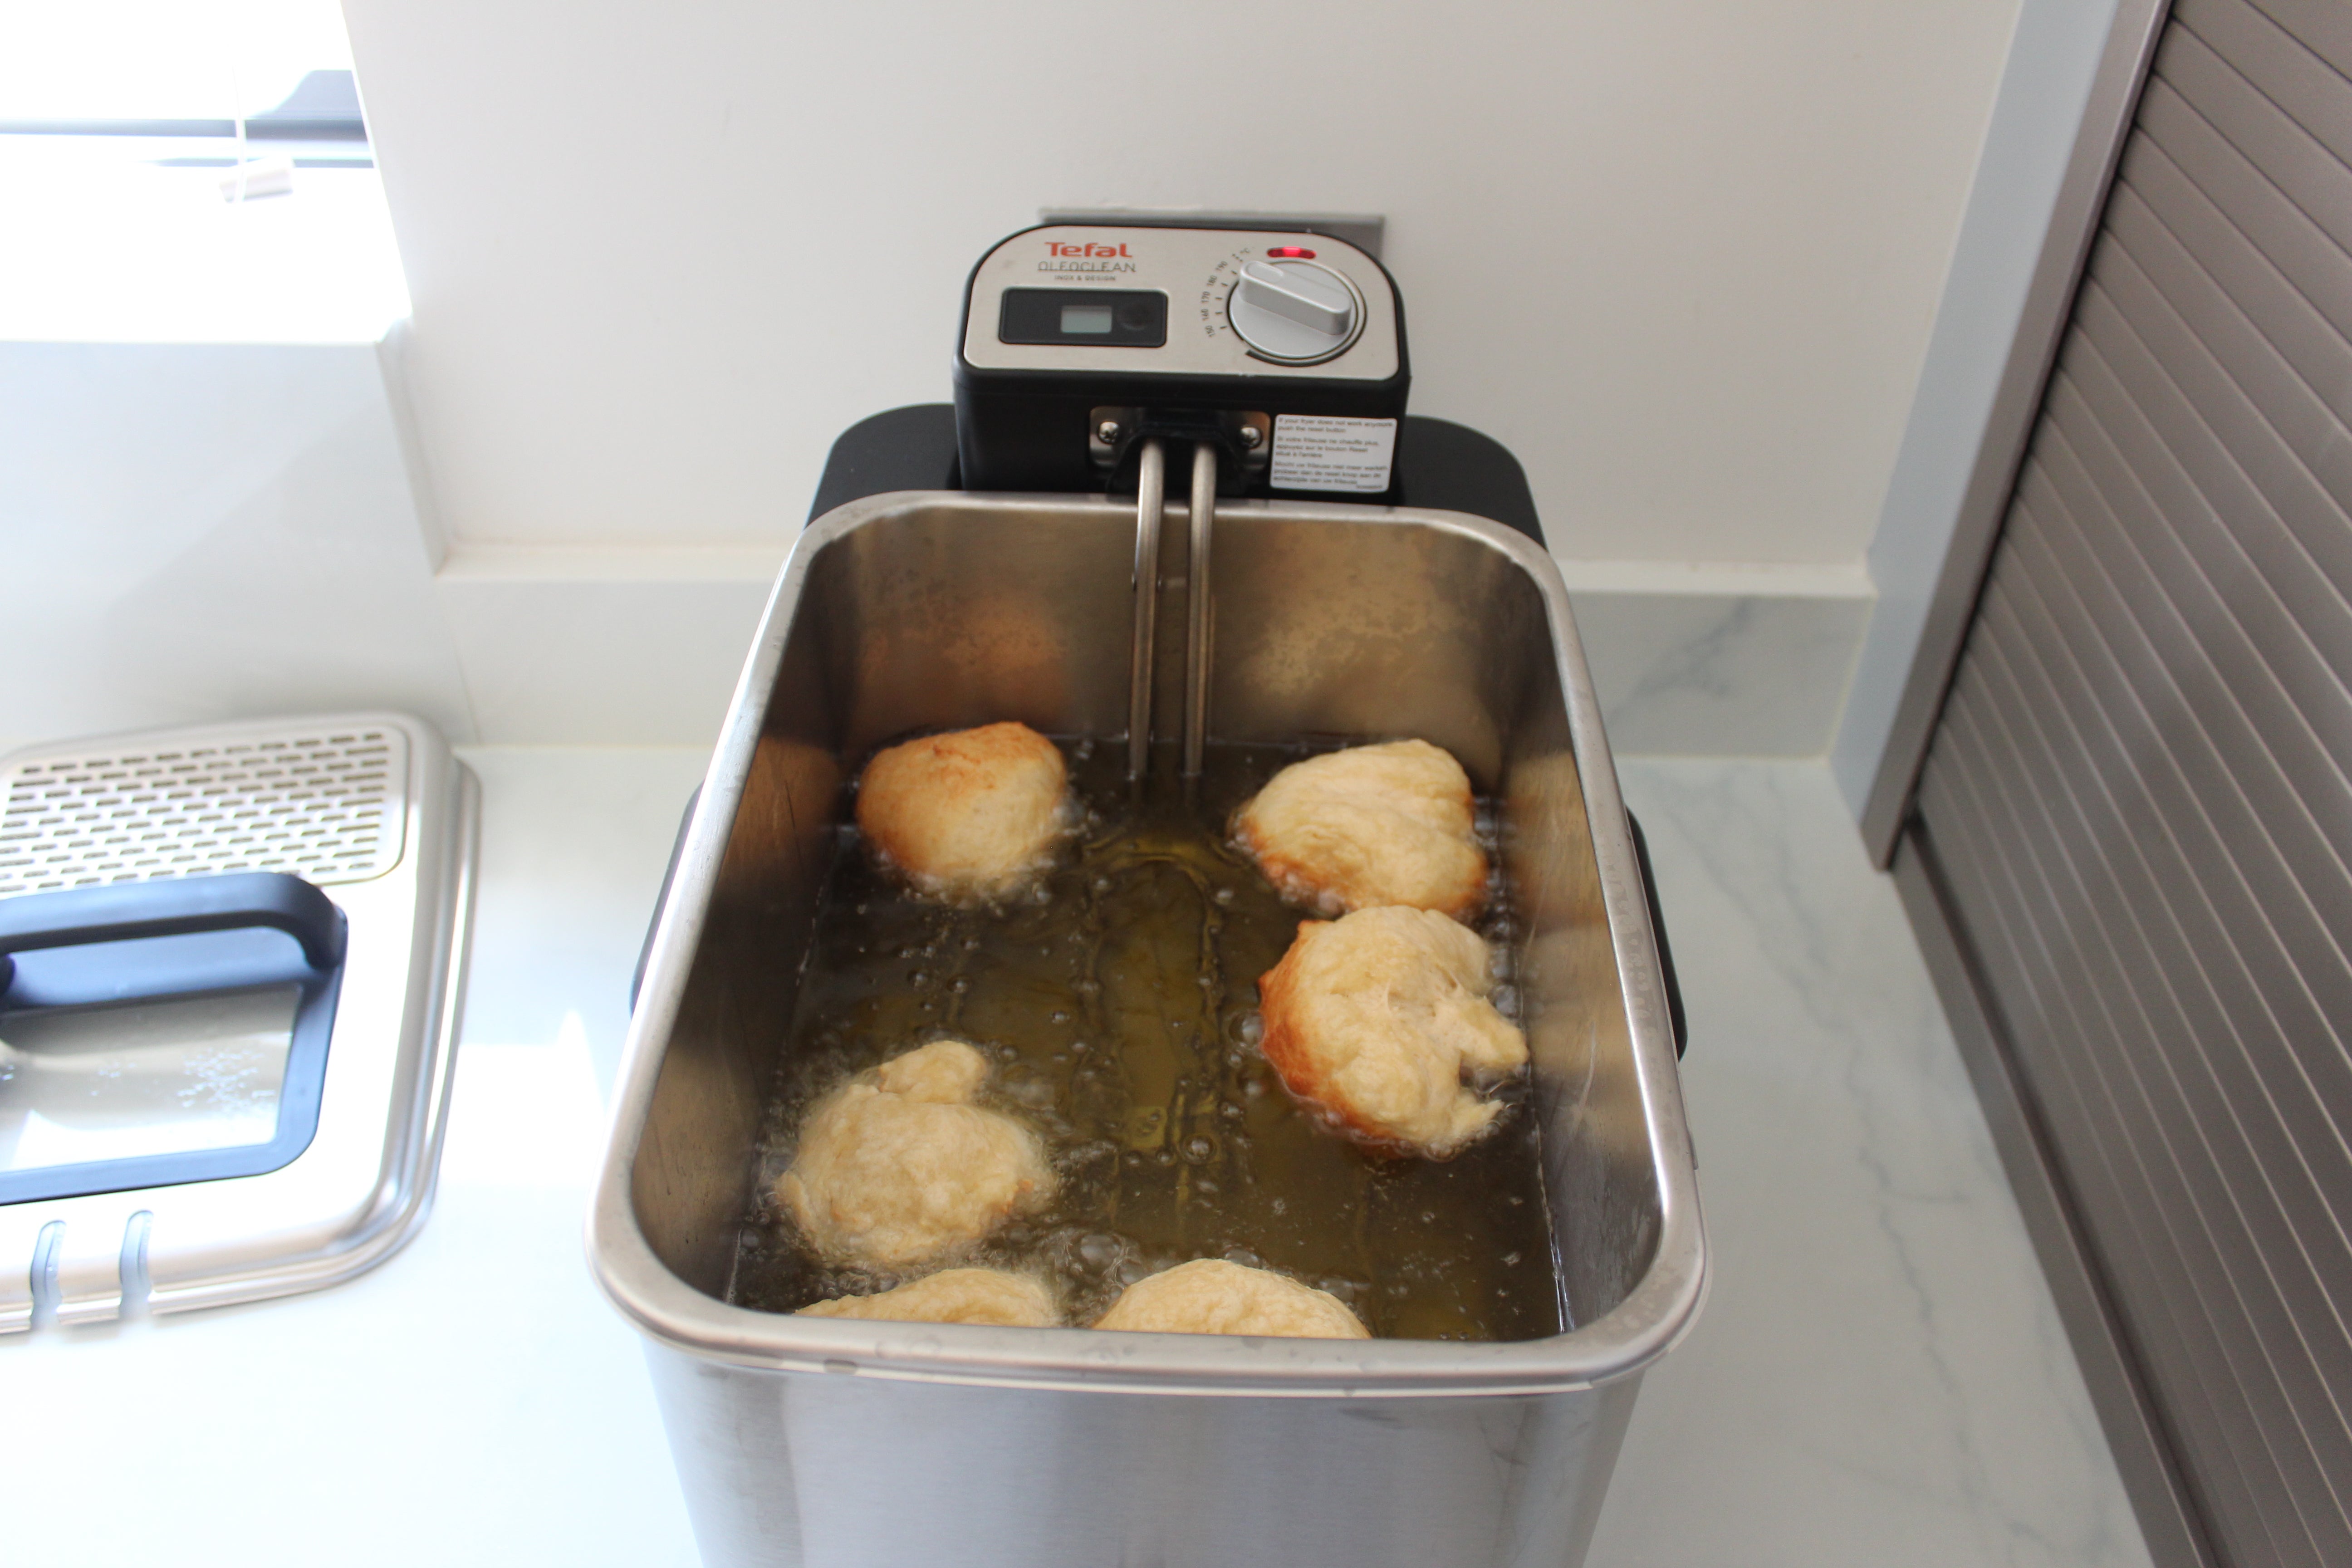 Tefal OleoClean Pro deep fryer in use with food frying.Tefal OleoClean Pro deep fryer frying chicken.Tefal FR804 OleoClean Pro deep fryer on kitchen counter.Fried treats on a plate next to Tefal OleoClean Pro fryer.